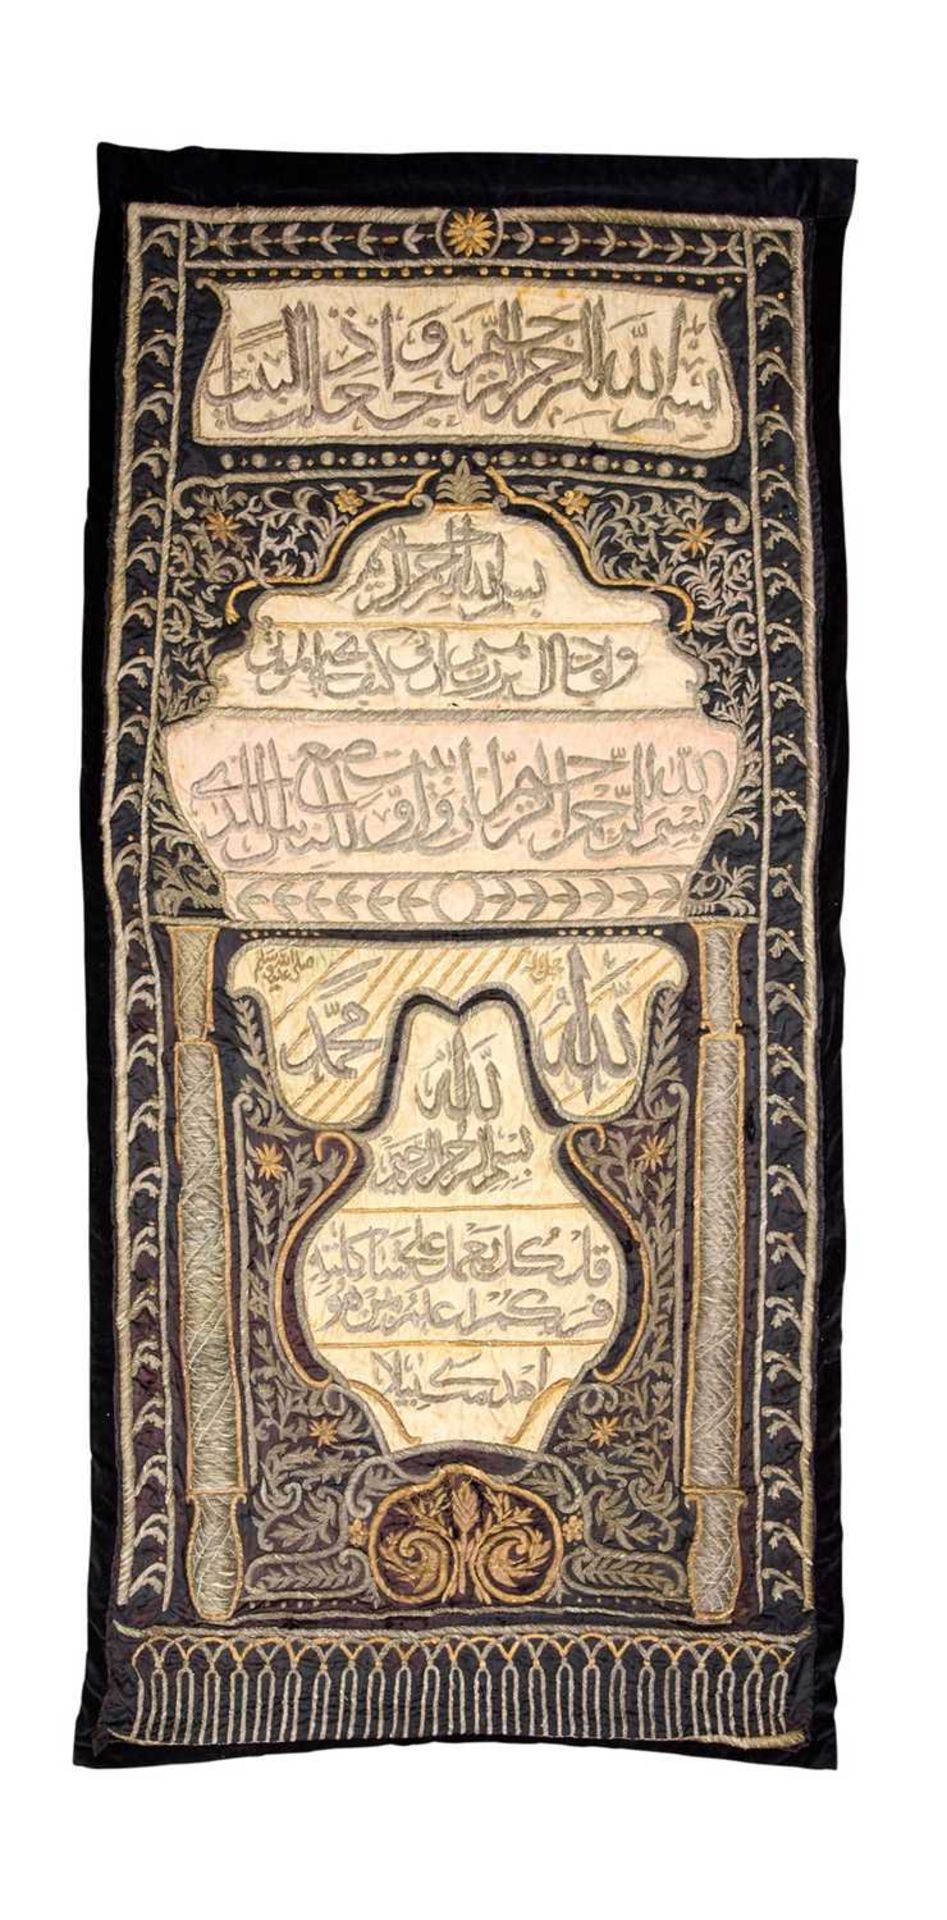 A 19TH CENTURY OTTOMAN SILVER THREAD AND SILK EMBROIDERED QURANIC CURTAIN